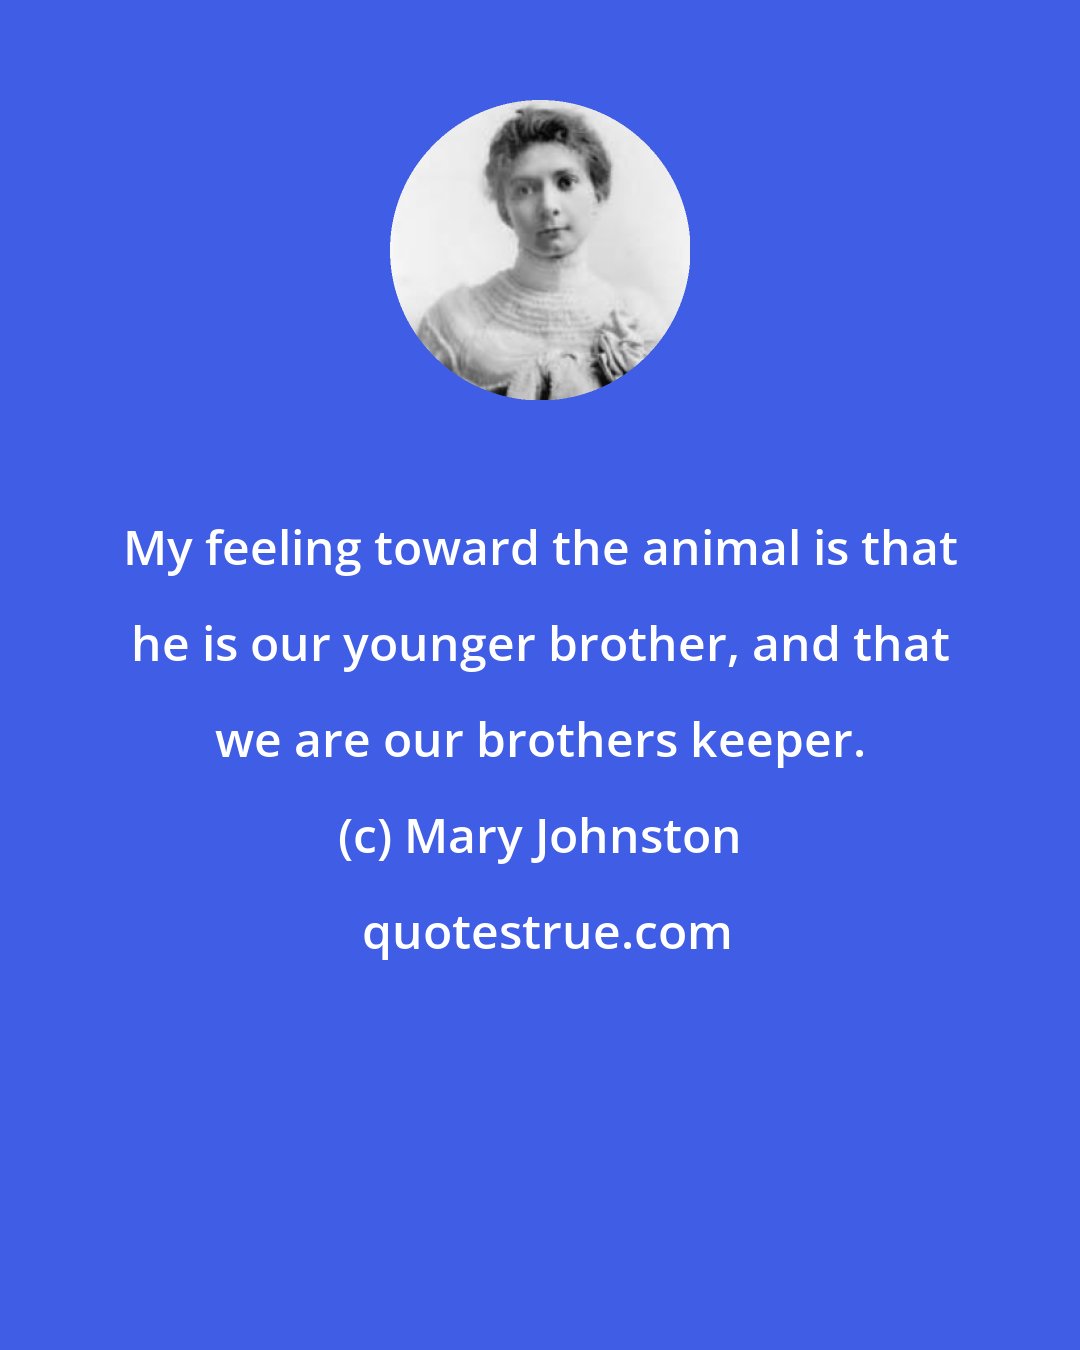 Mary Johnston: My feeling toward the animal is that he is our younger brother, and that we are our brothers keeper.